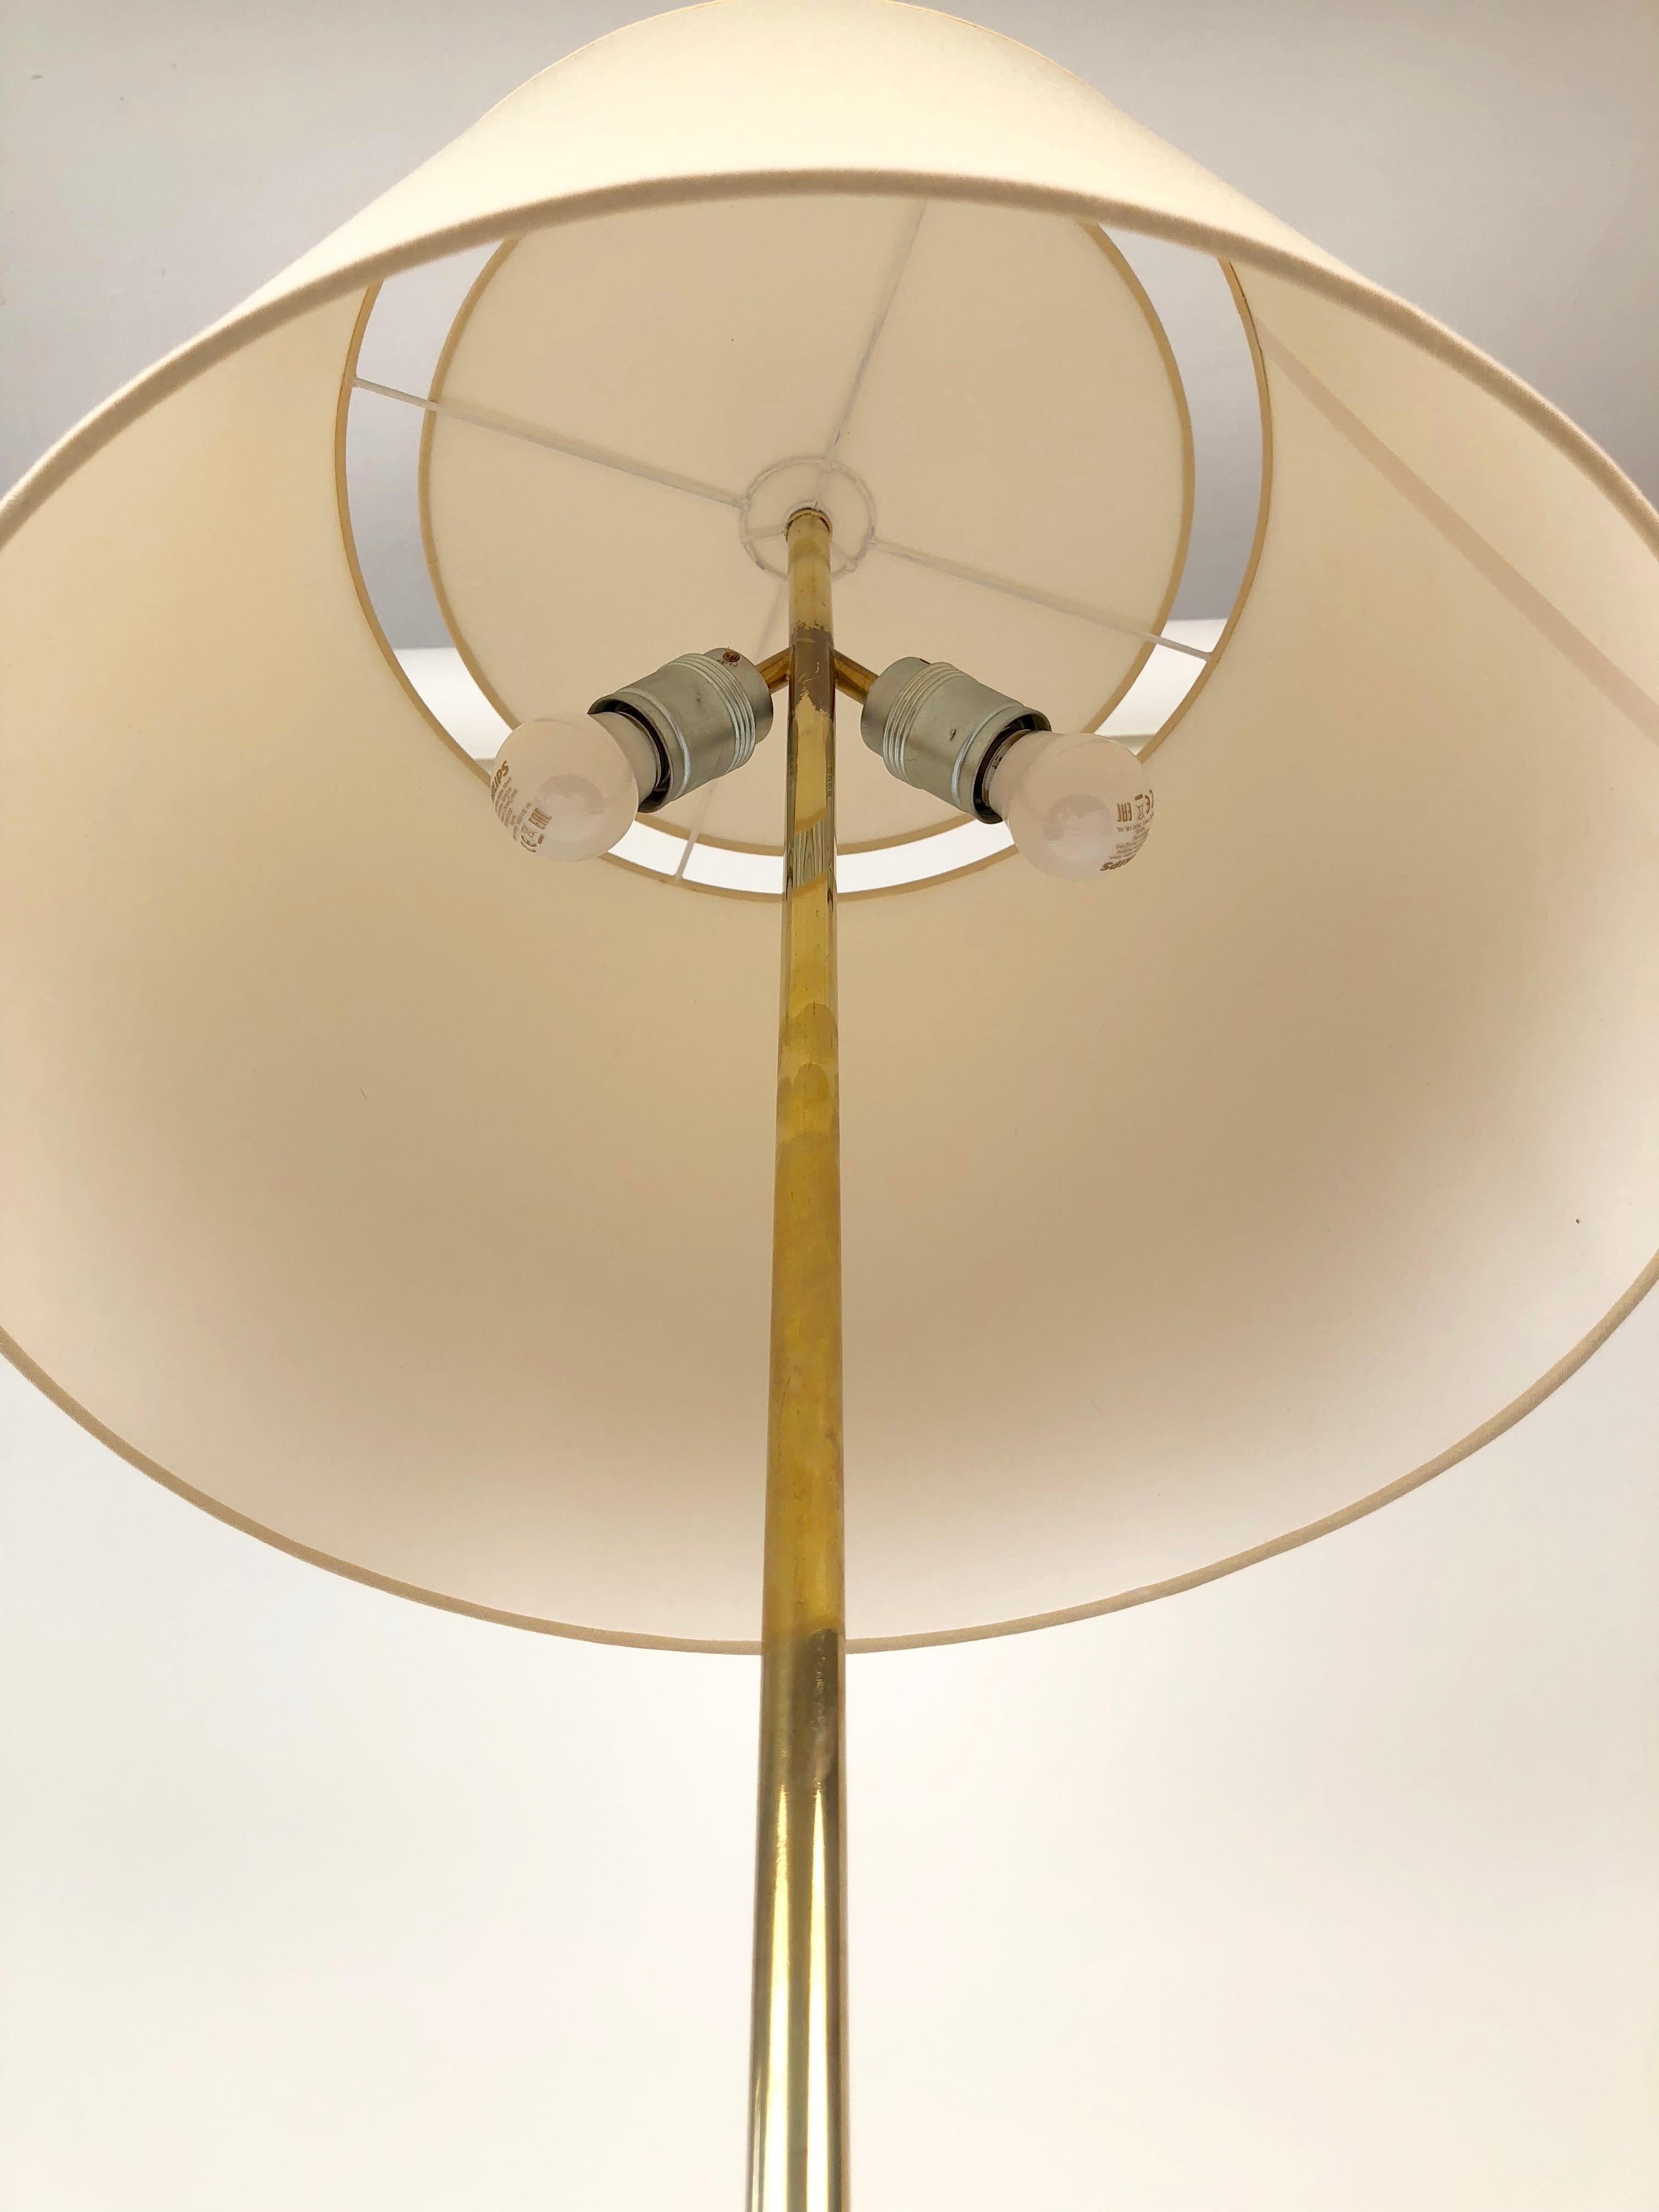 A tripod floor lamp, model No. 2003 from J.T. Kalmar, was manufactured between 1930 until 1960. This was a very popular model for Kalmar and there exists many variations with subtile differences. The lamp is composed of patinated, polished brass, a